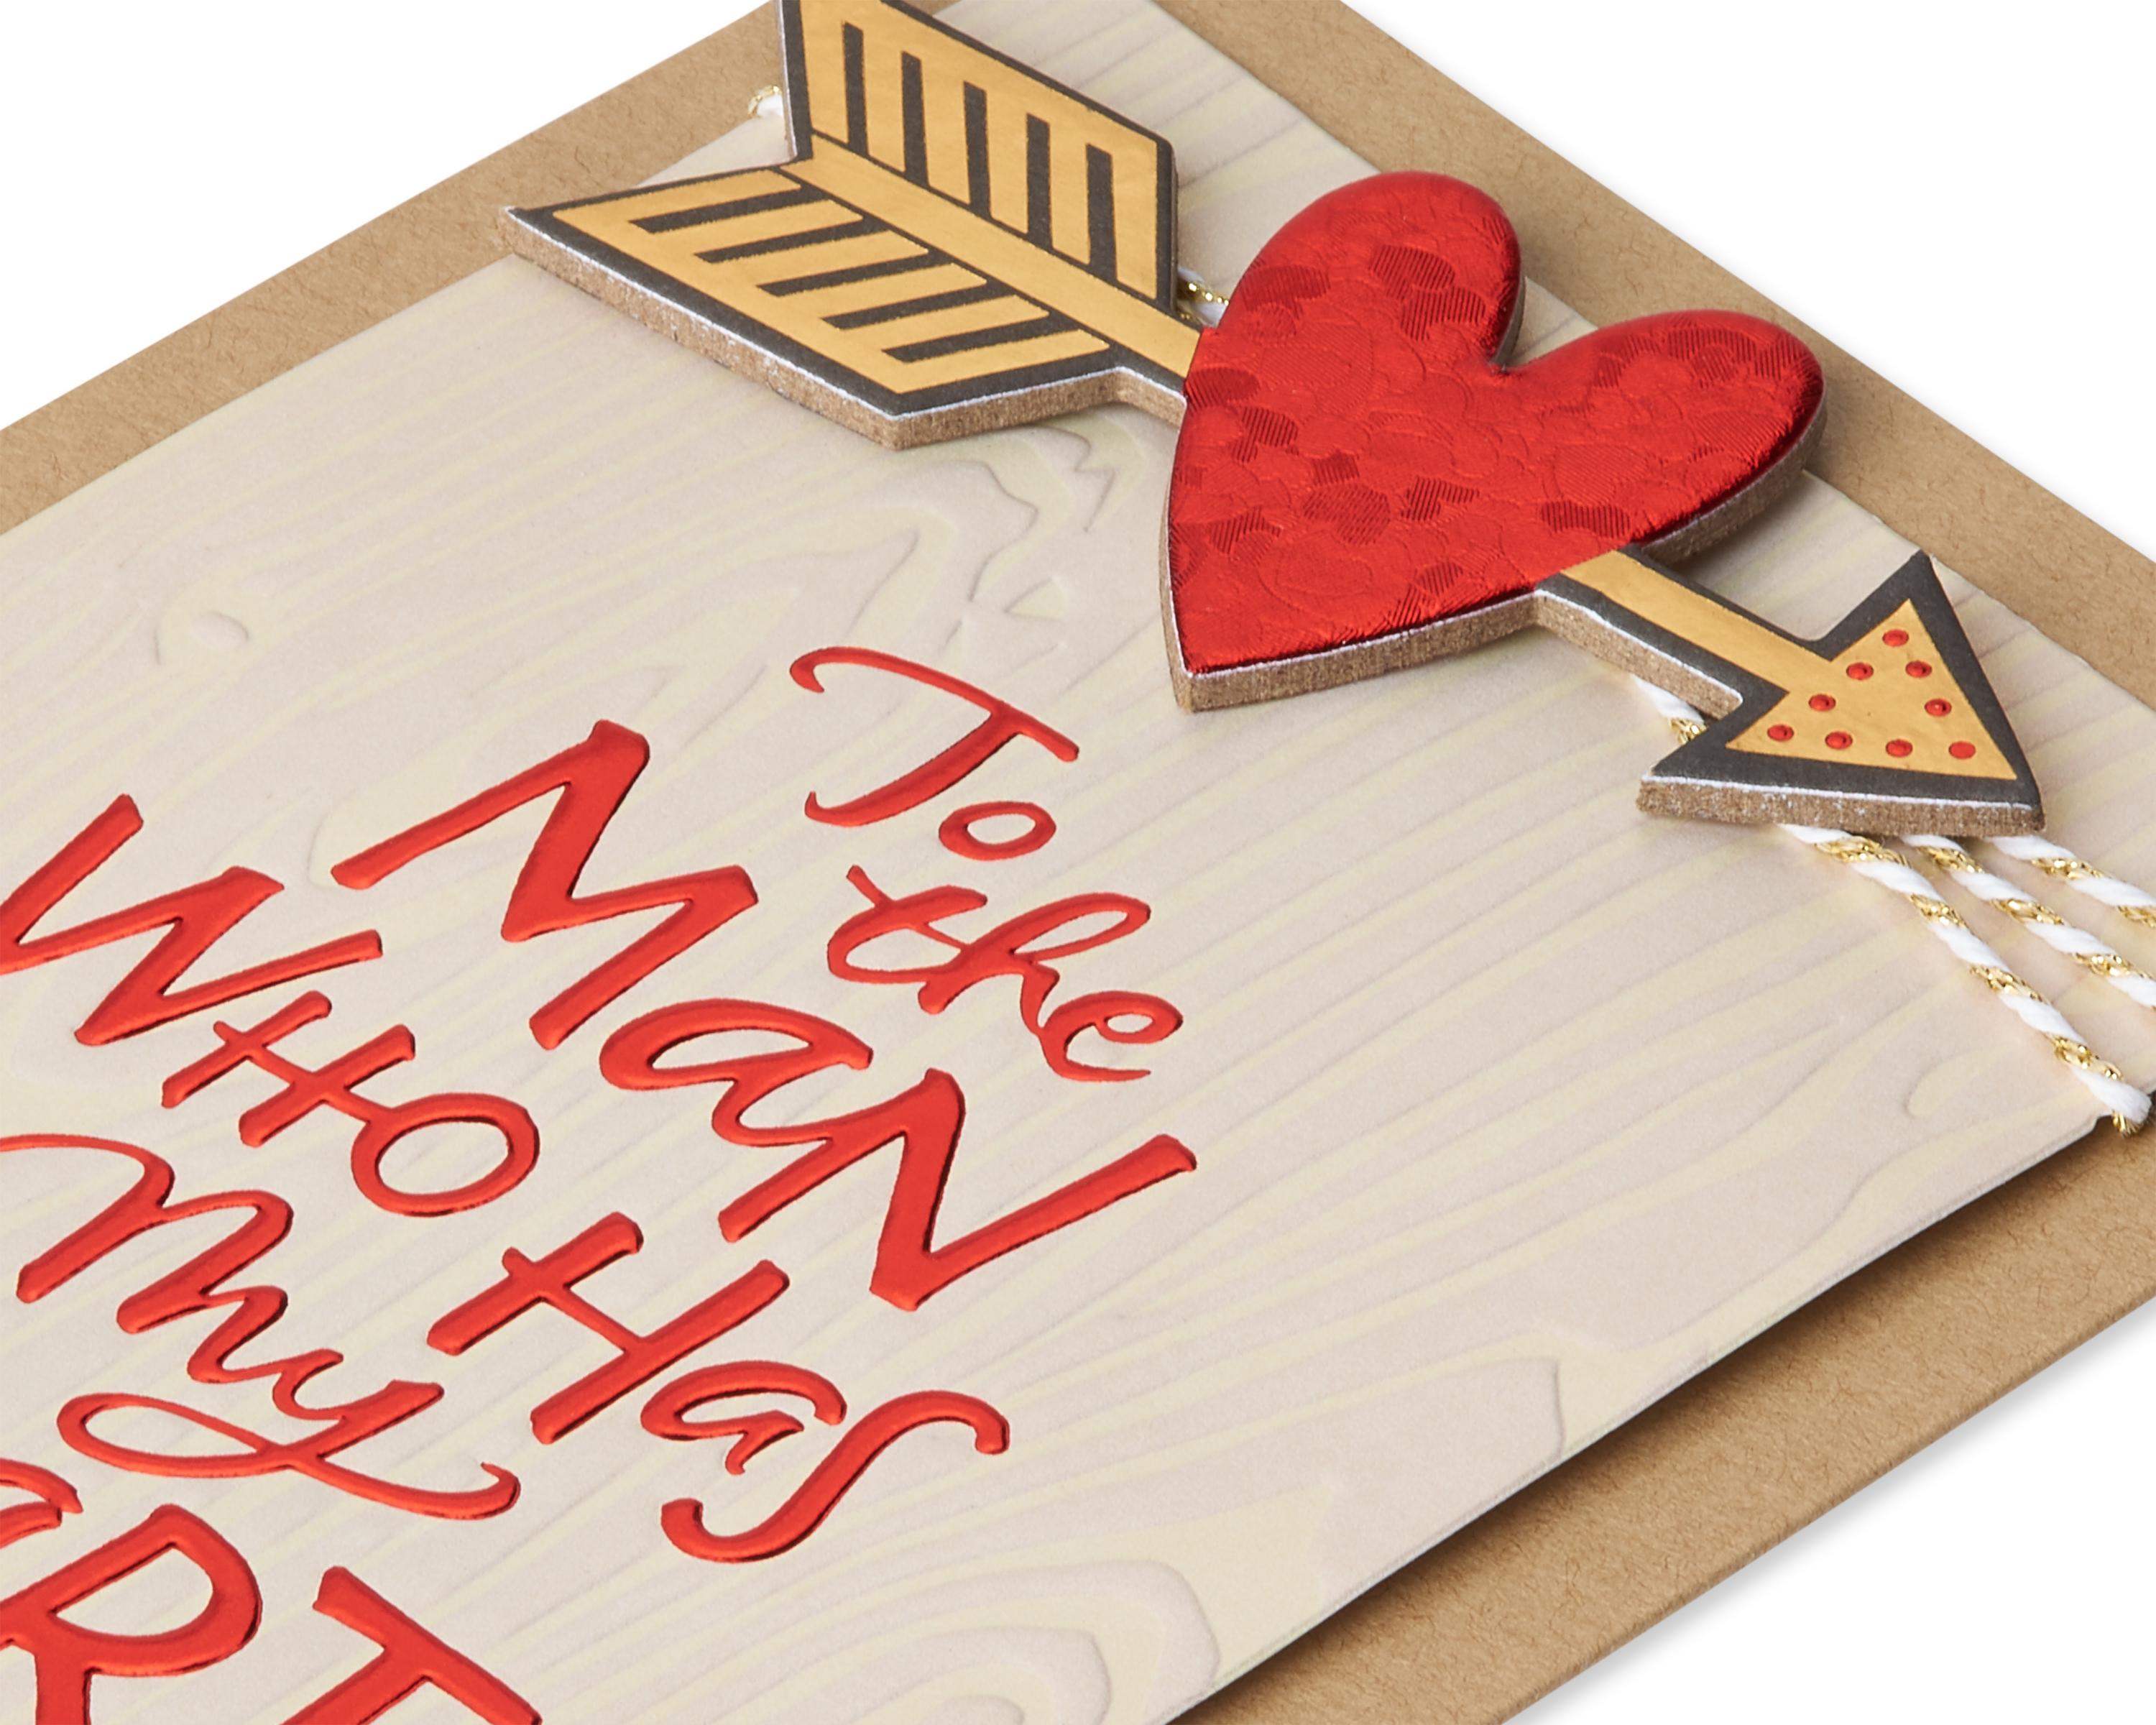 American Greetings Romantic Valentine's Day Card for Him (Man Who Has My Heart) - image 3 of 3